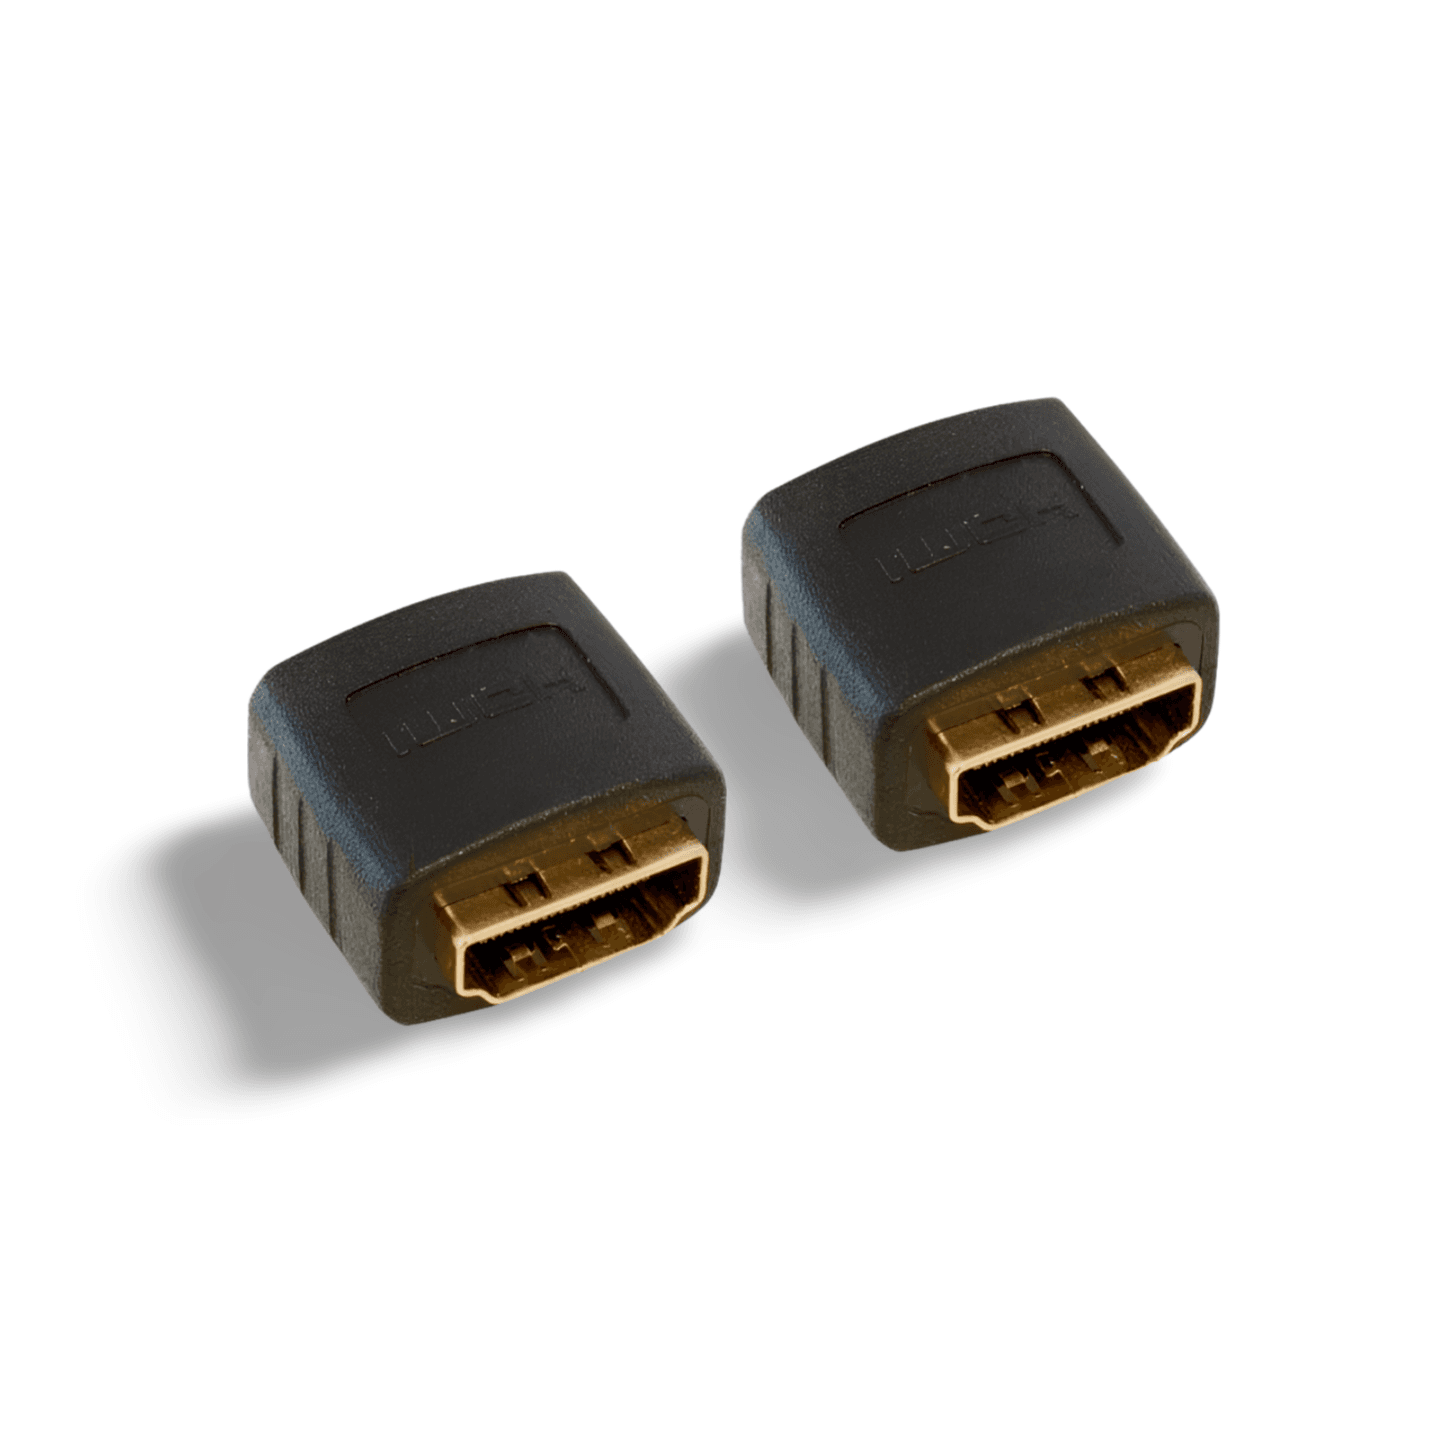 1in HDMI Adapter Type A Female to Type A Female Coupler Gender Changer black